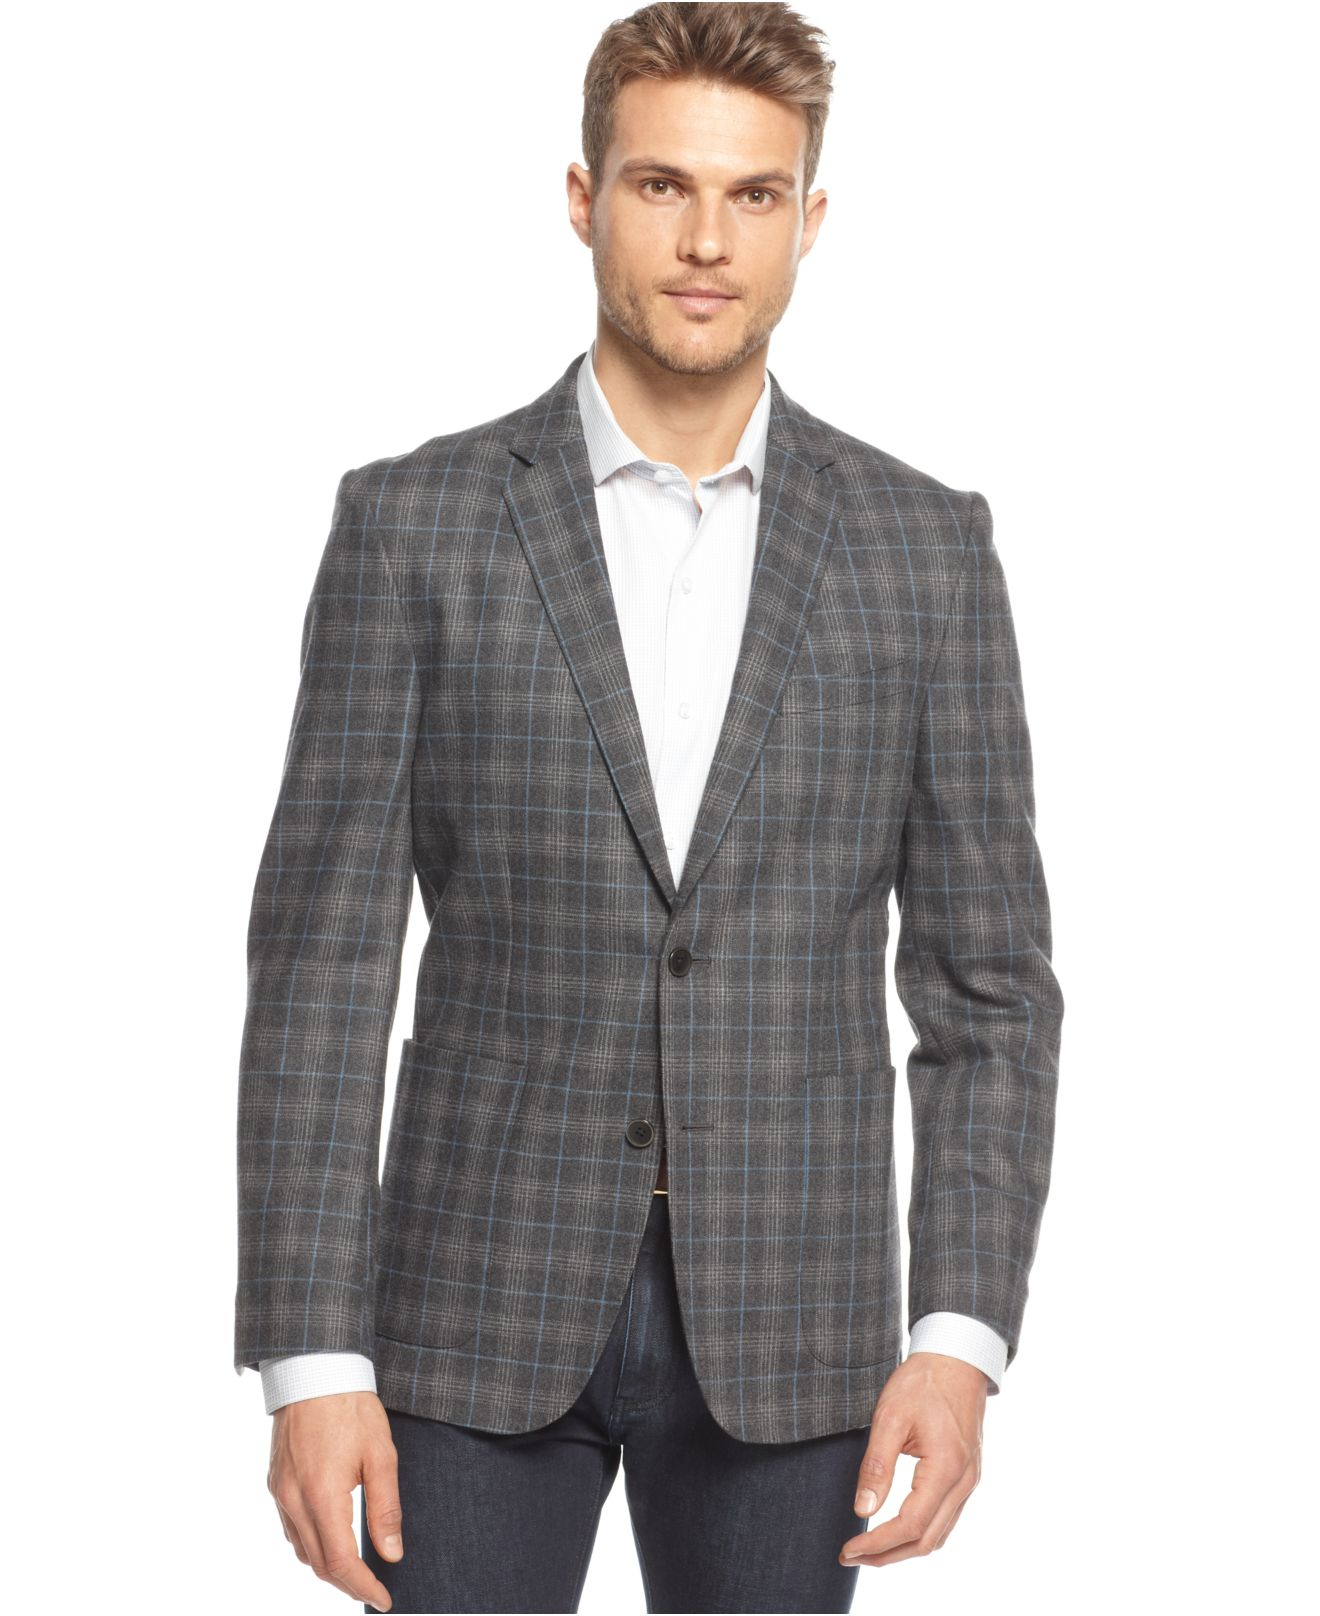 Lyst - Vince Camuto Air Plaid Jacket in Gray for Men